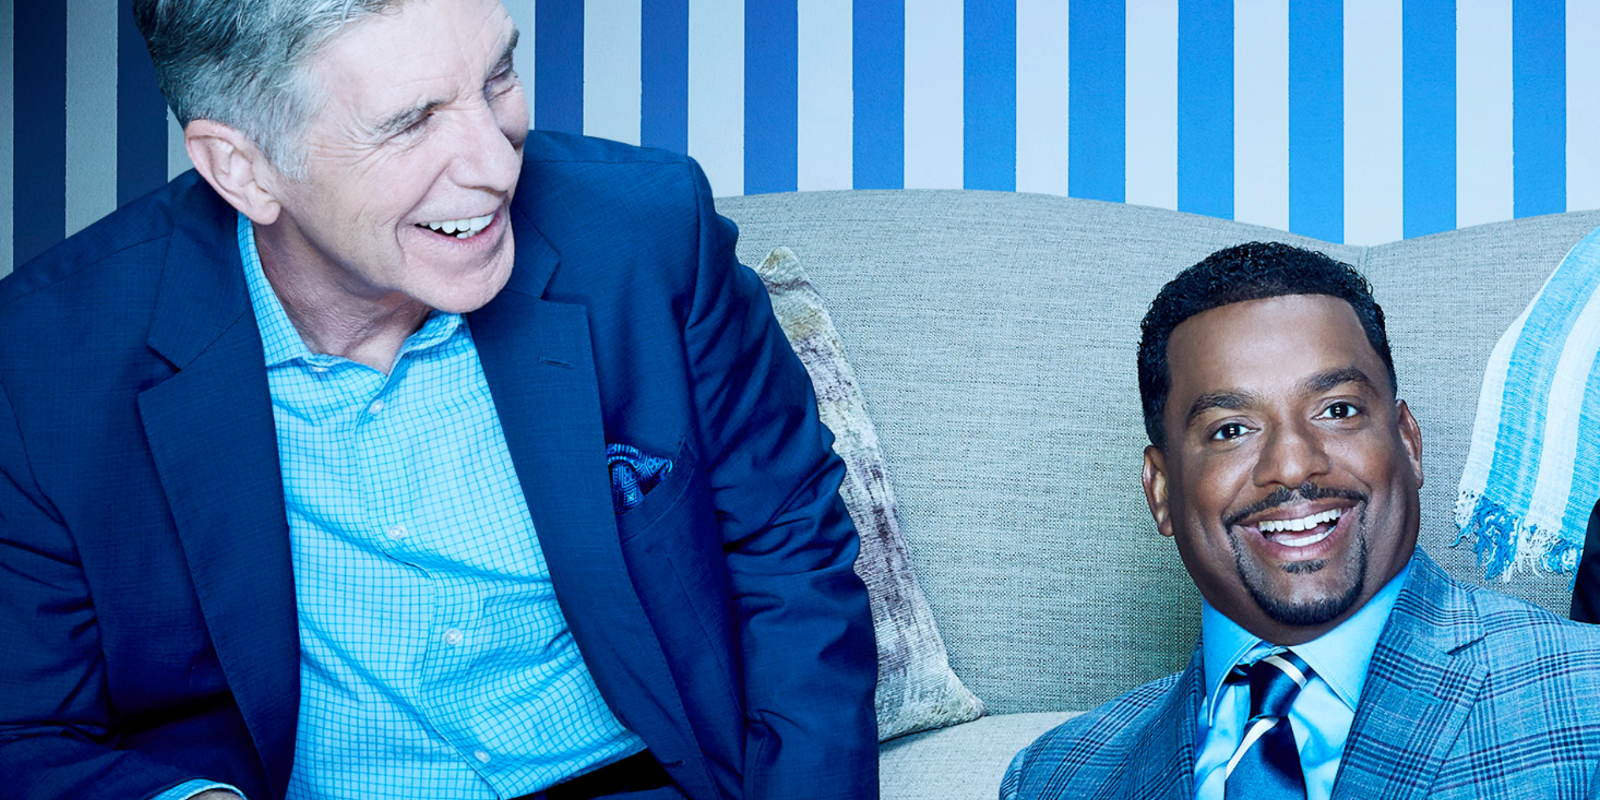 'Dancing with the Stars' hosts past and present: Tom Bergeron and Alfonso Ribeiro laugh during a press photo.